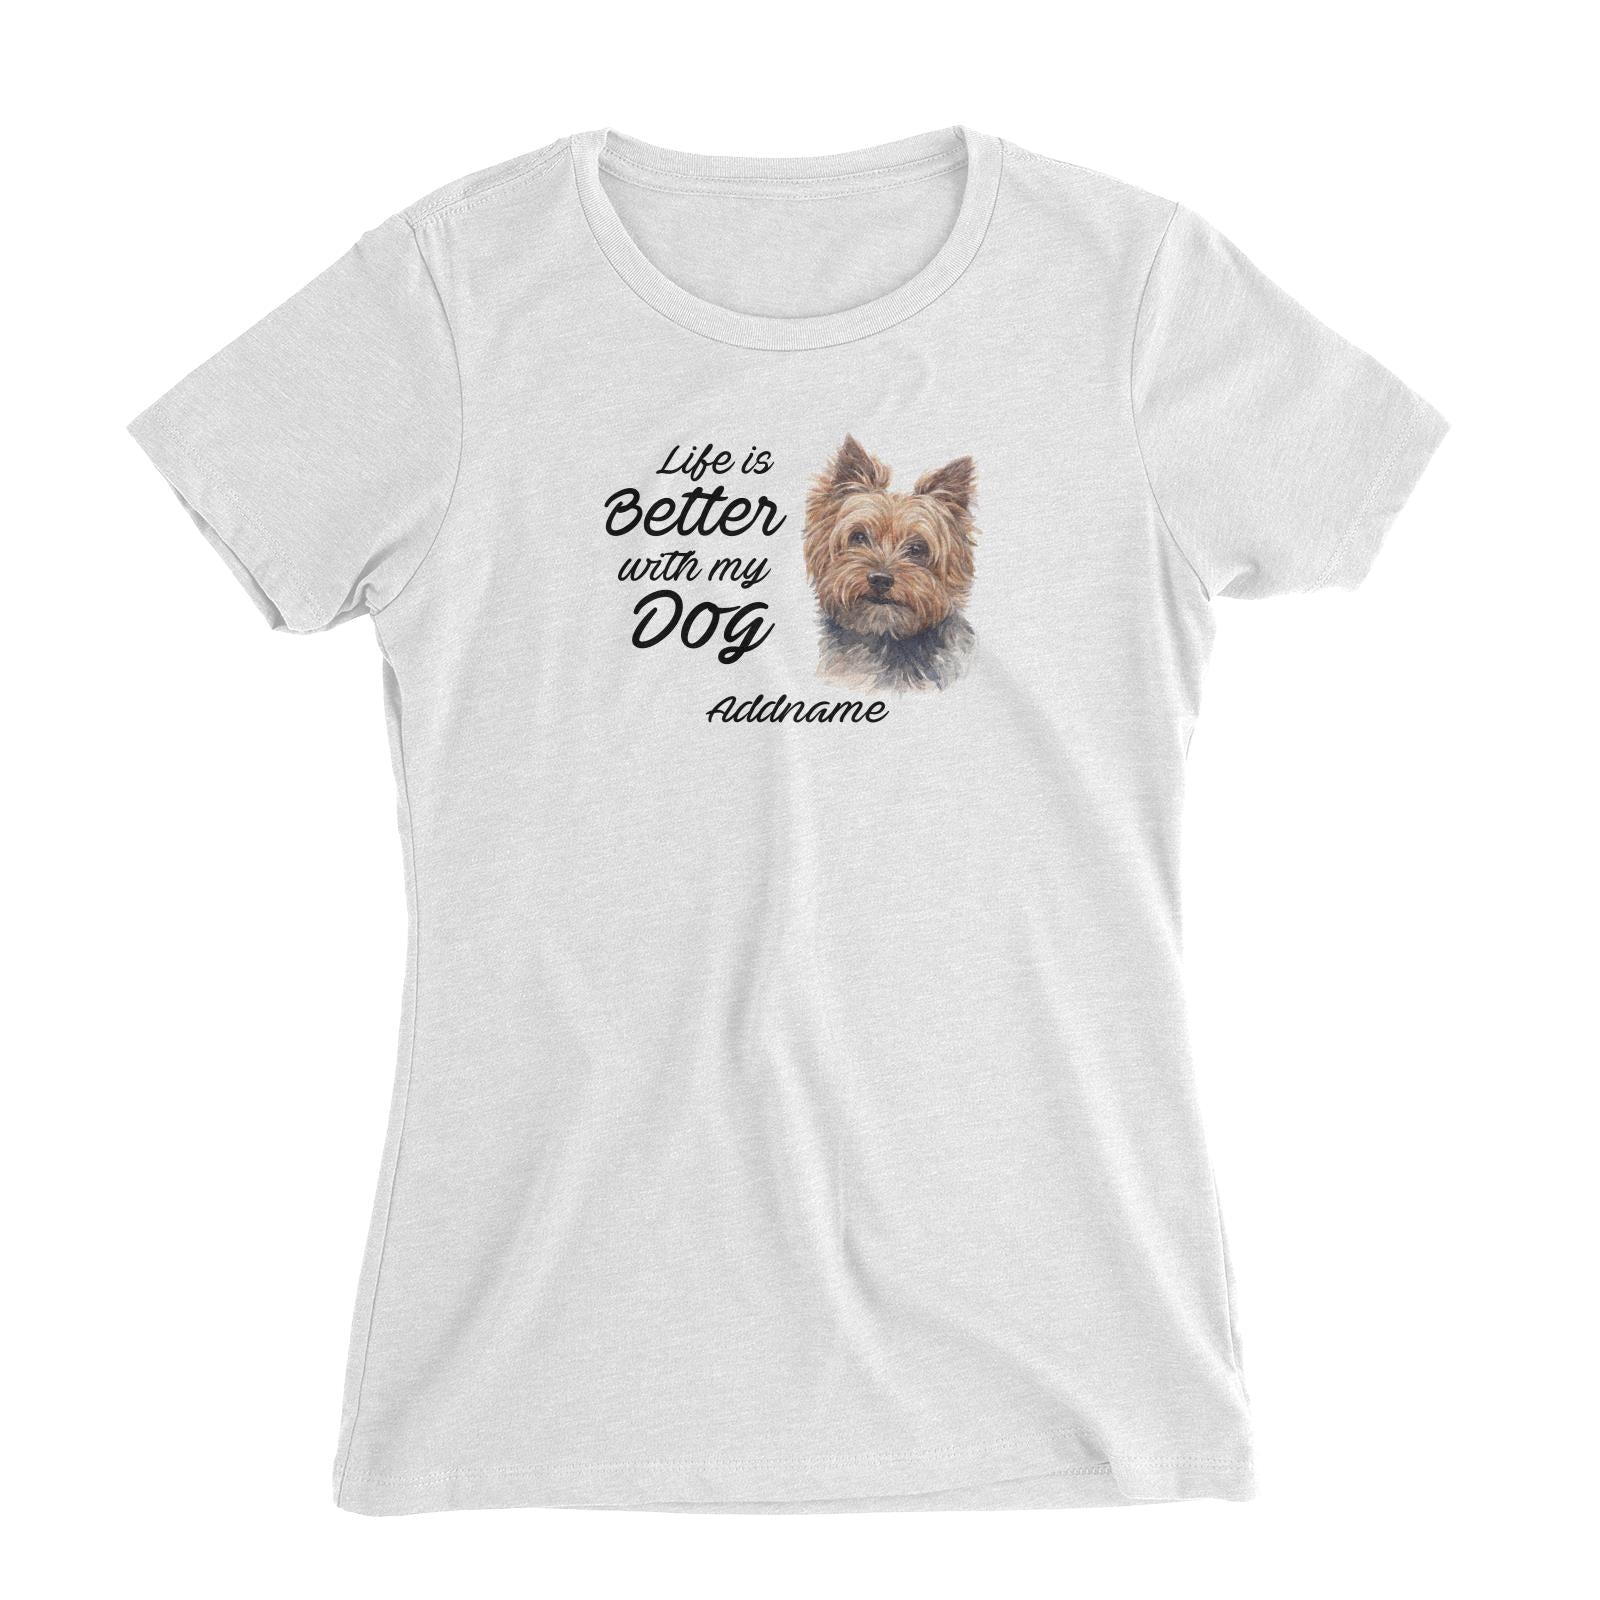 Watercolor Life is Better With My Dog Yorkshire Terrier Addname Women's Slim Fit T-Shirt